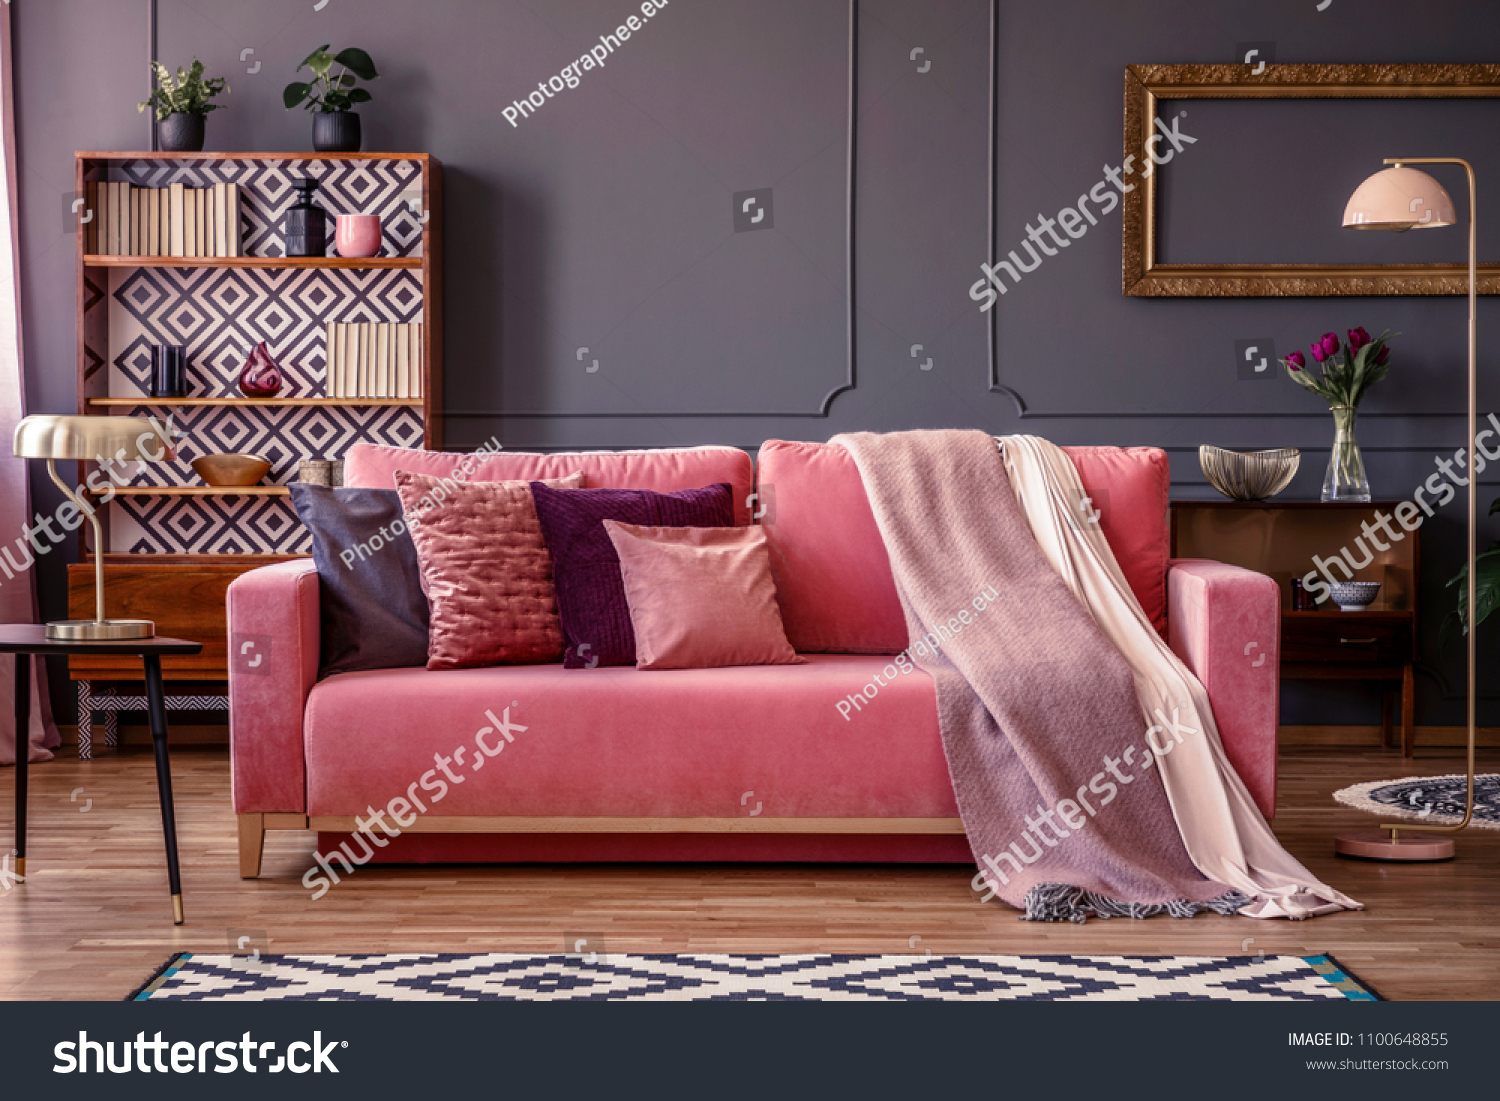 Front view of a pink sofa with pillows and blanket, vintage cupboard in the background in a glamorous living room interior #1100648855